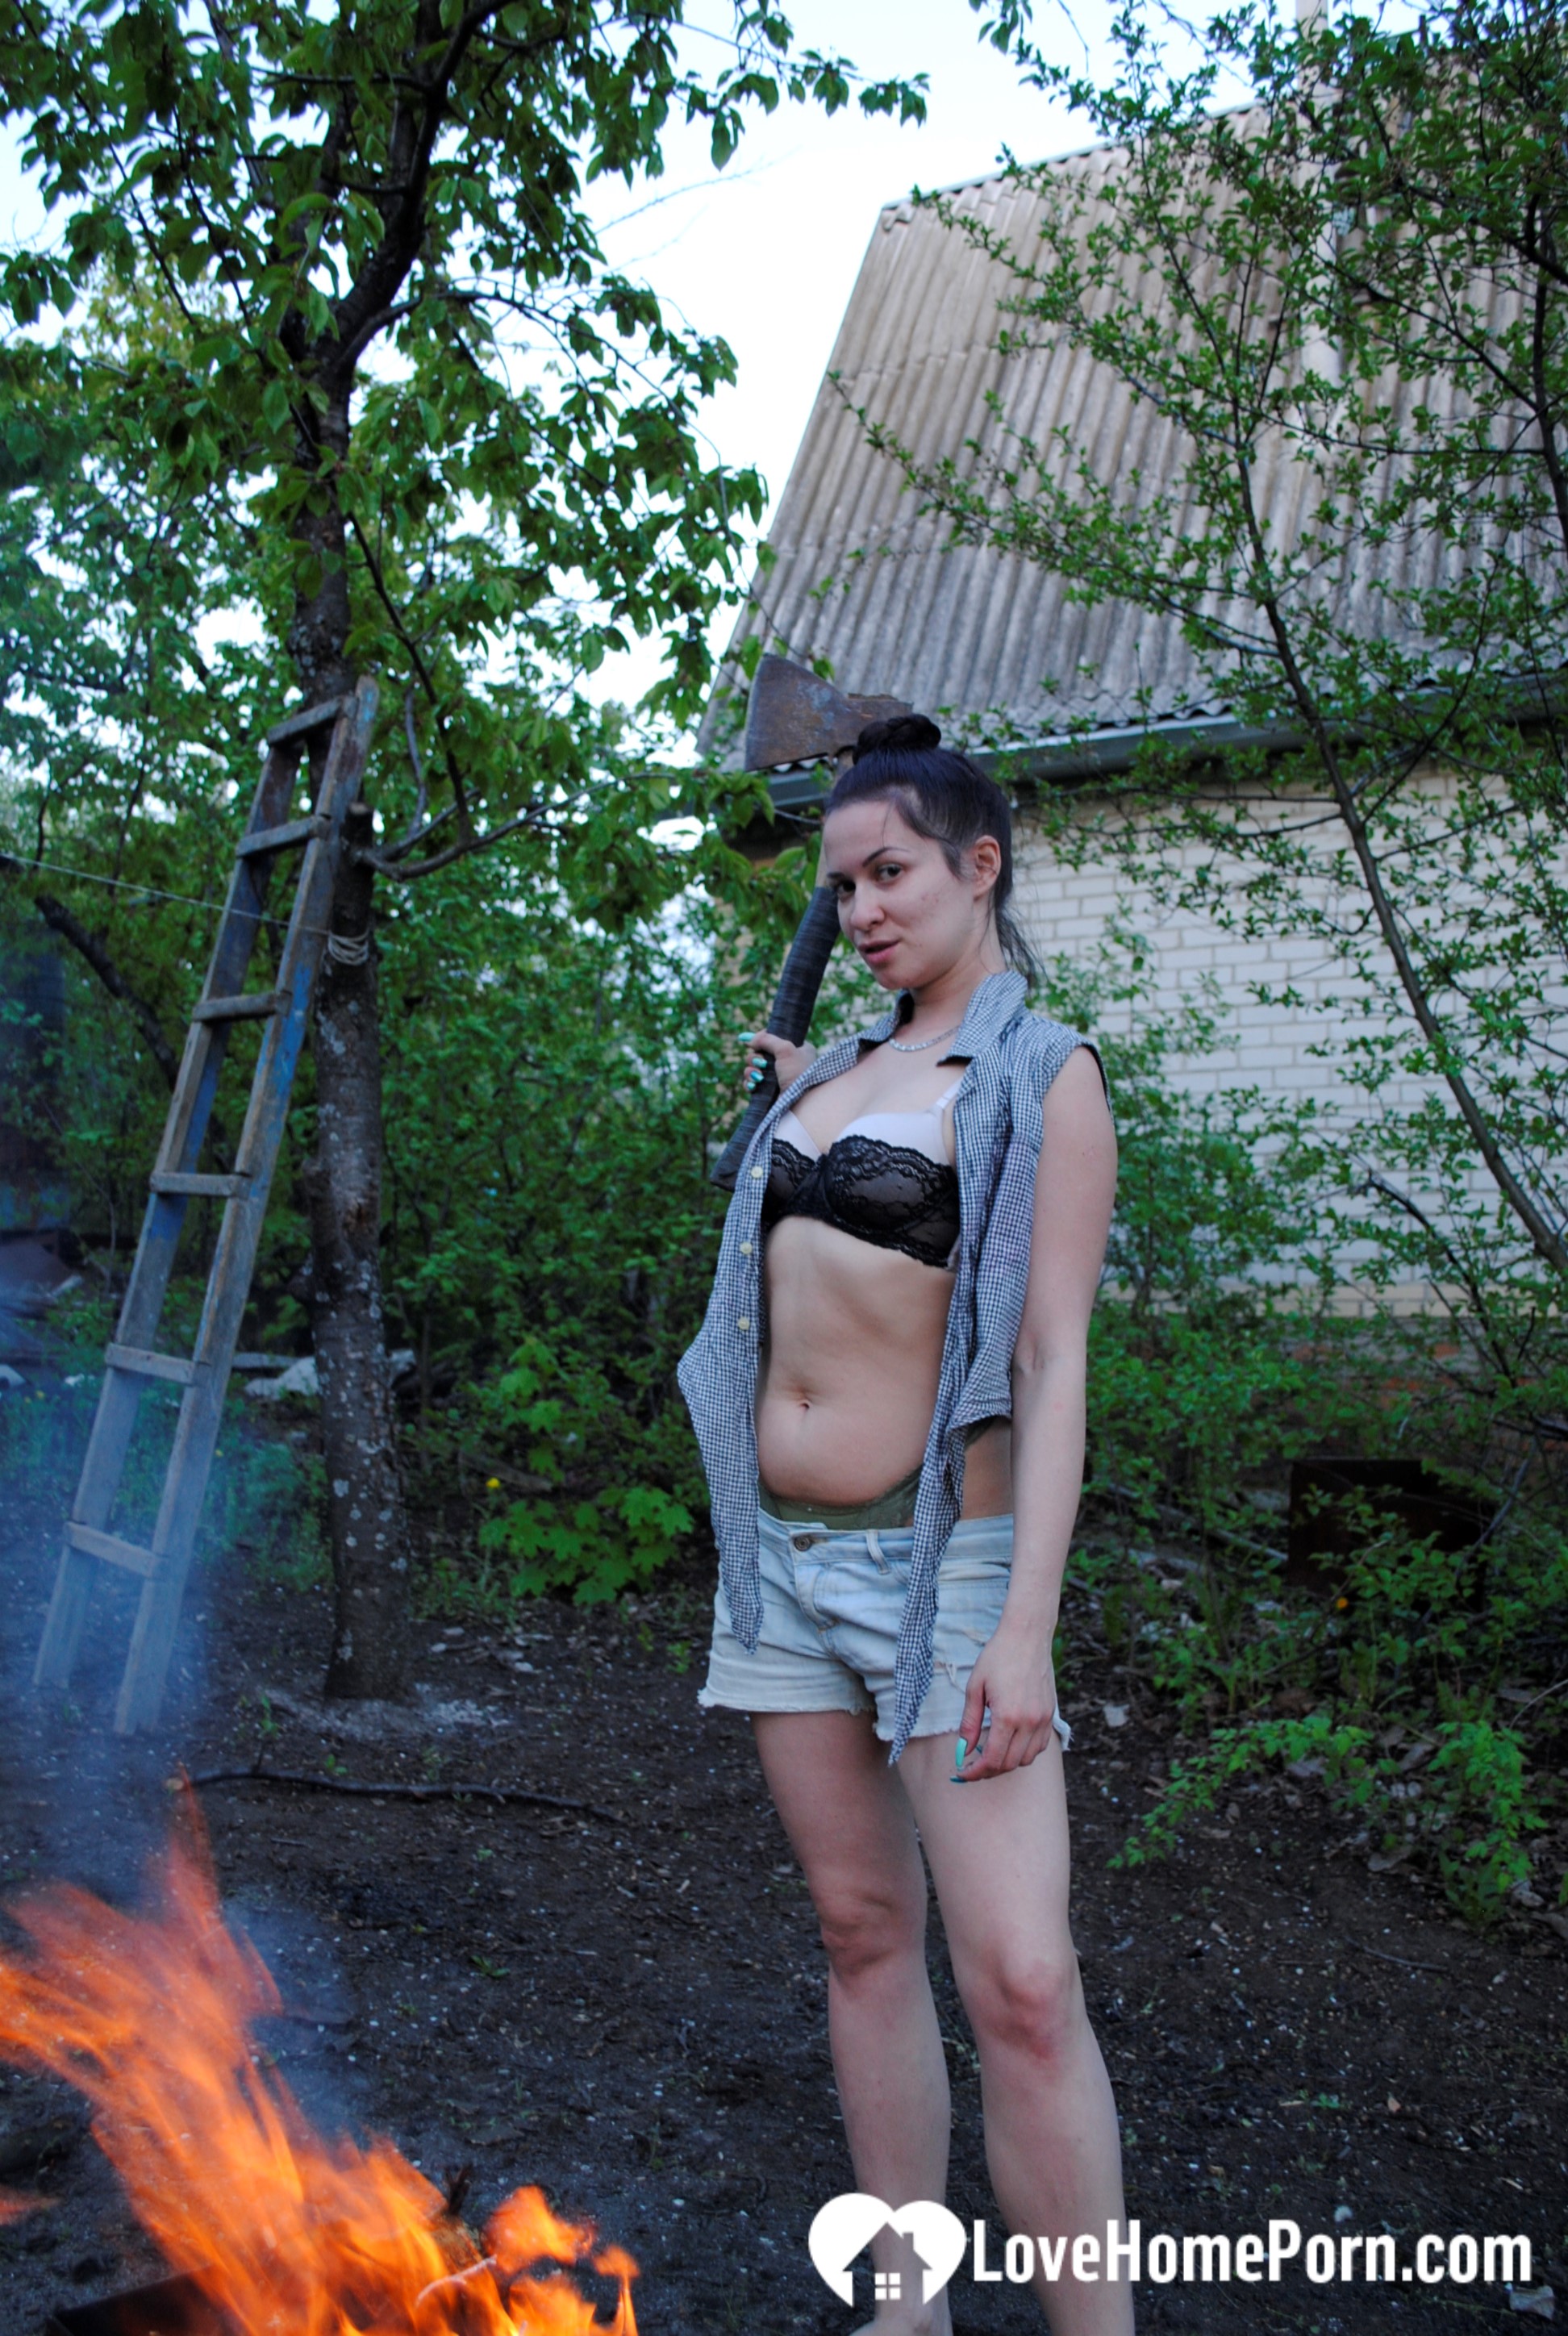 Barbecuing makes her hot so she strips